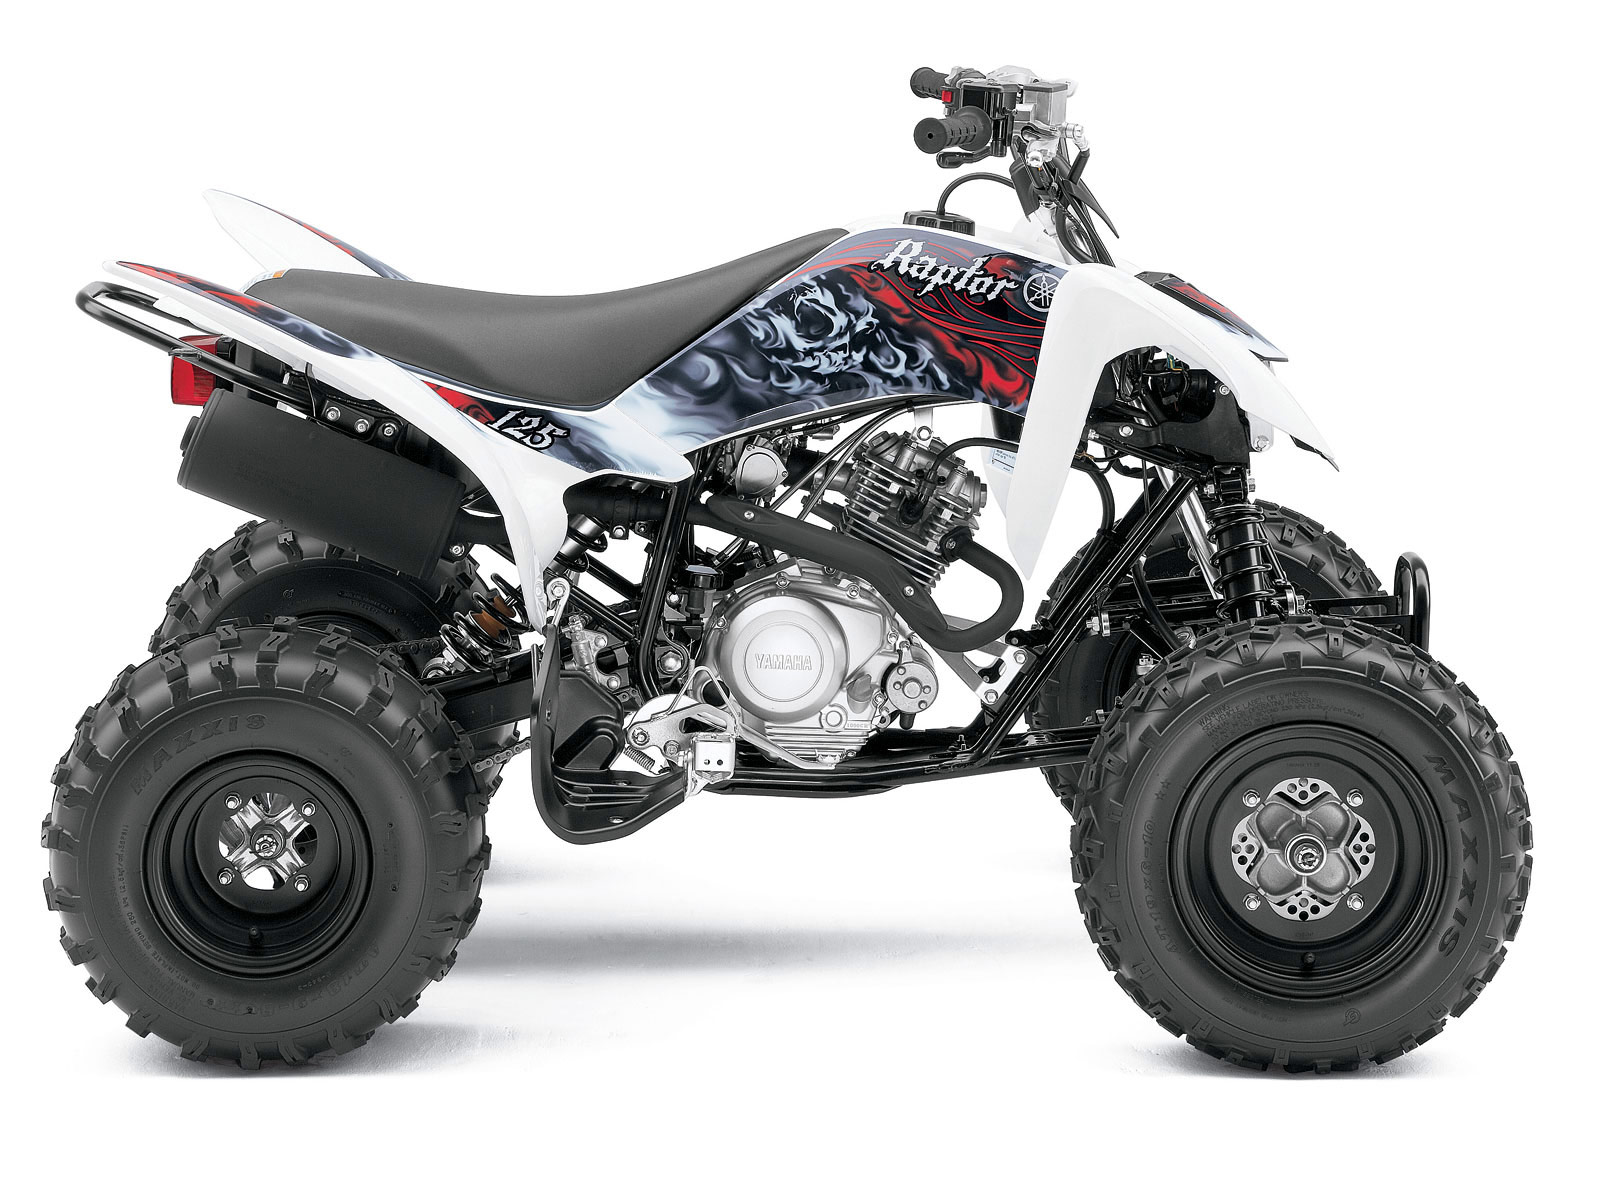 2011 YAMAHA Raptor 125 pictures, specs, ATV accident lawyers